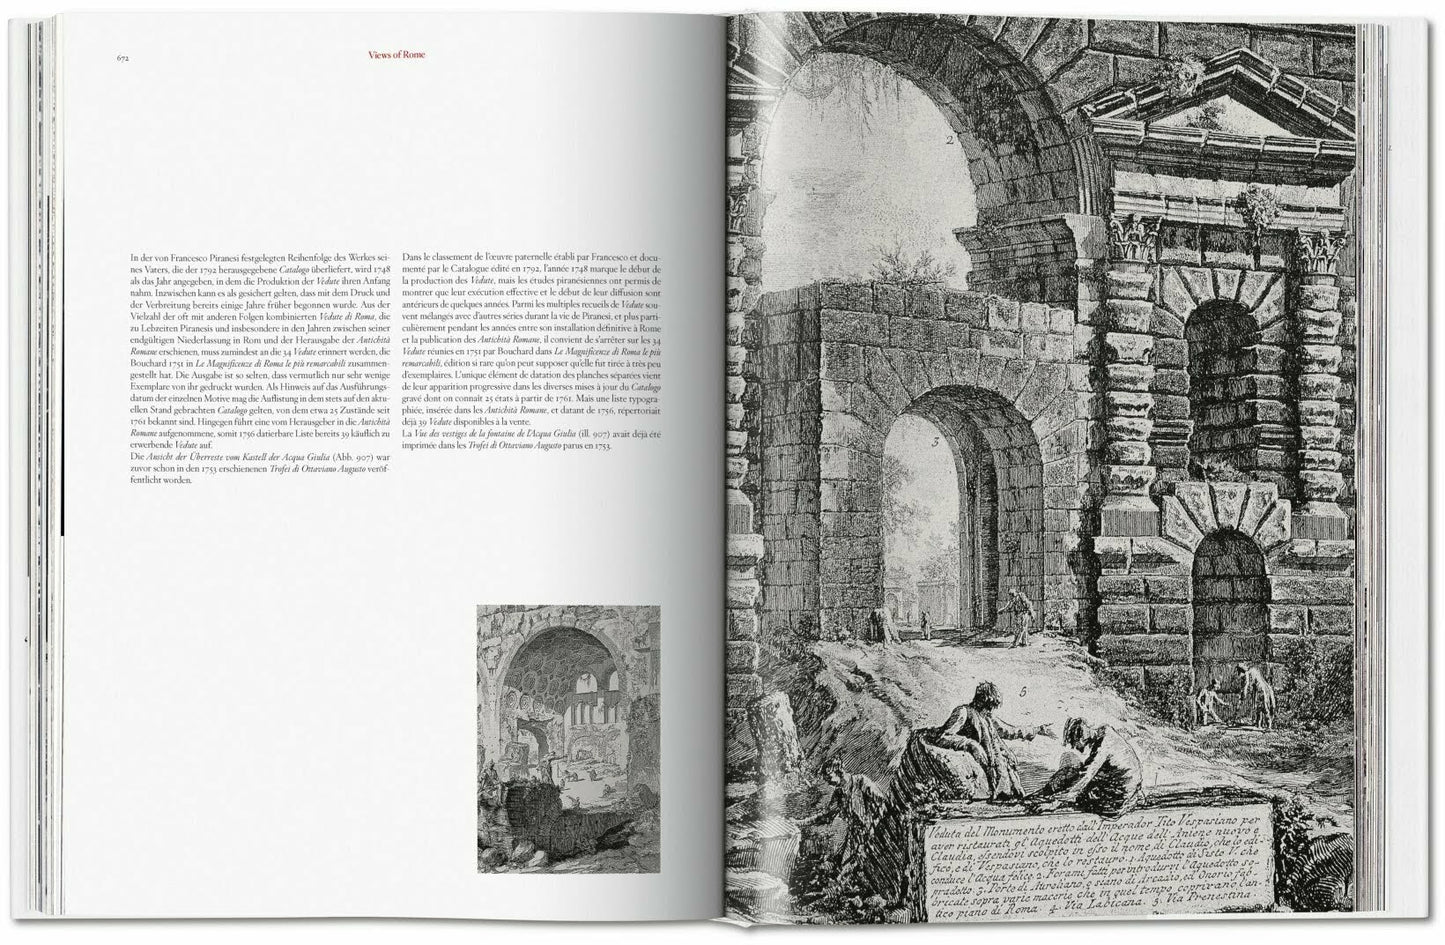 Piranesi: The Complete Etchings